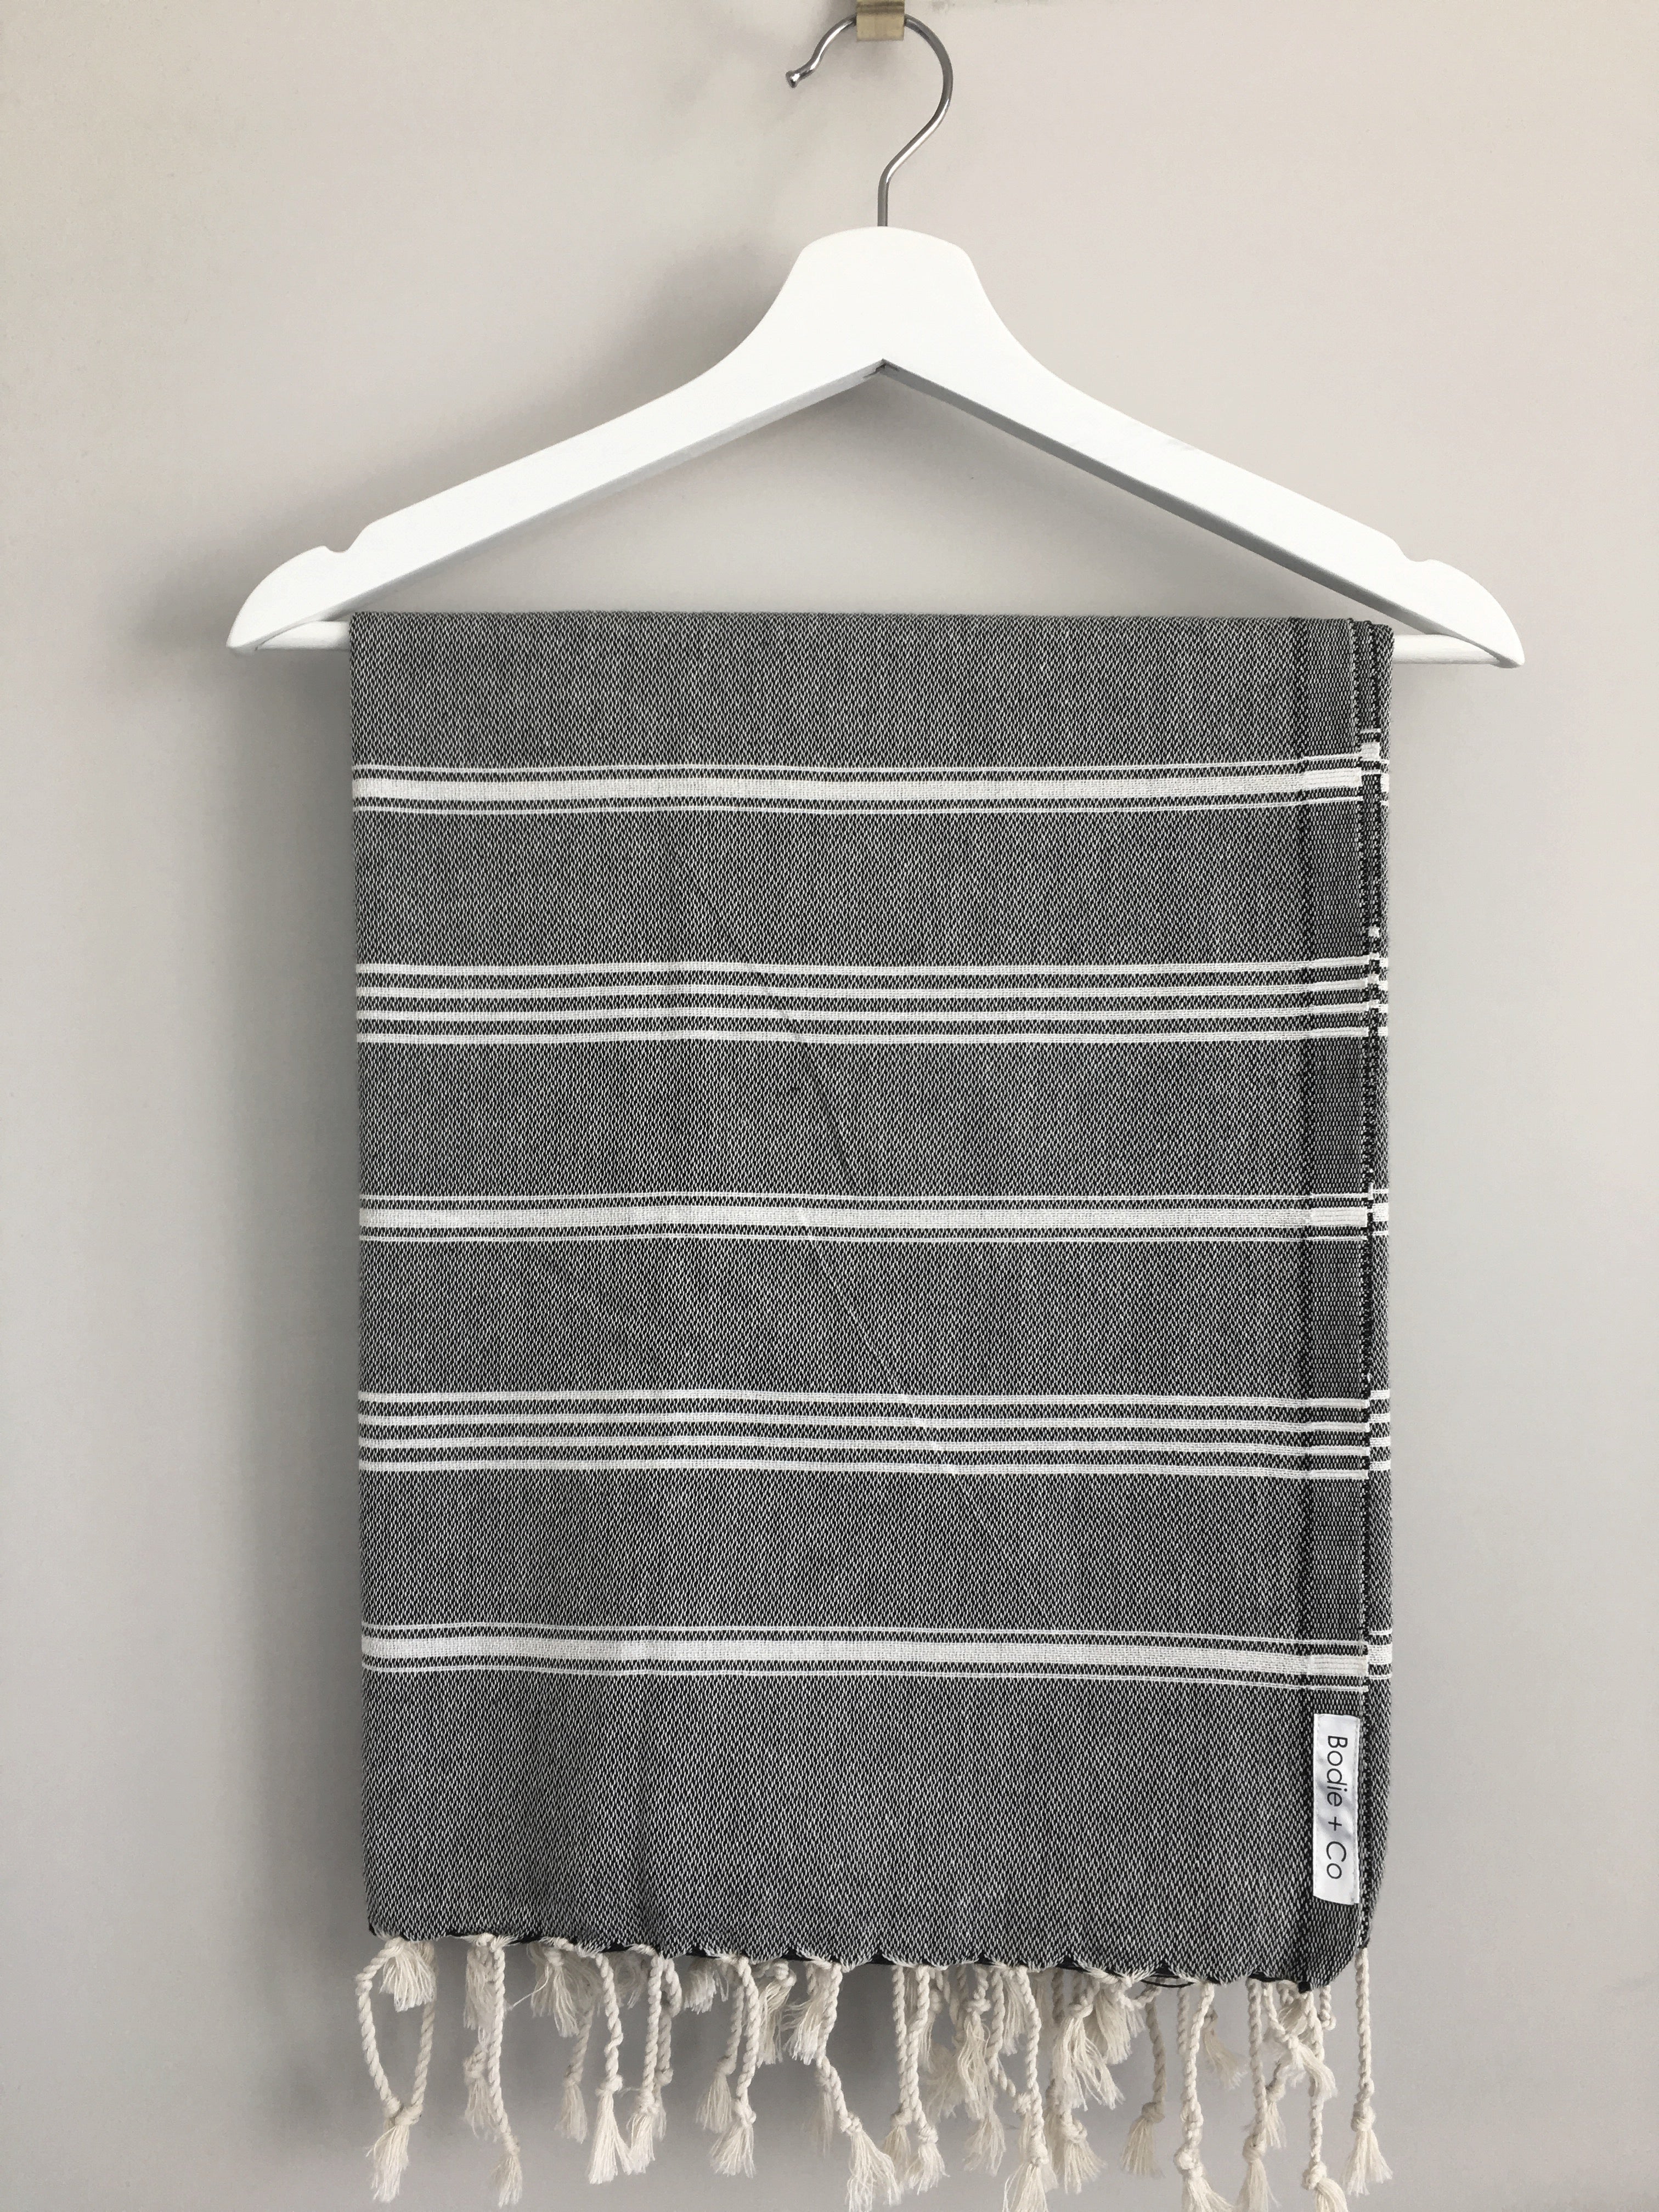 Vancouver Bodie and Co Jacob Turkish Towel